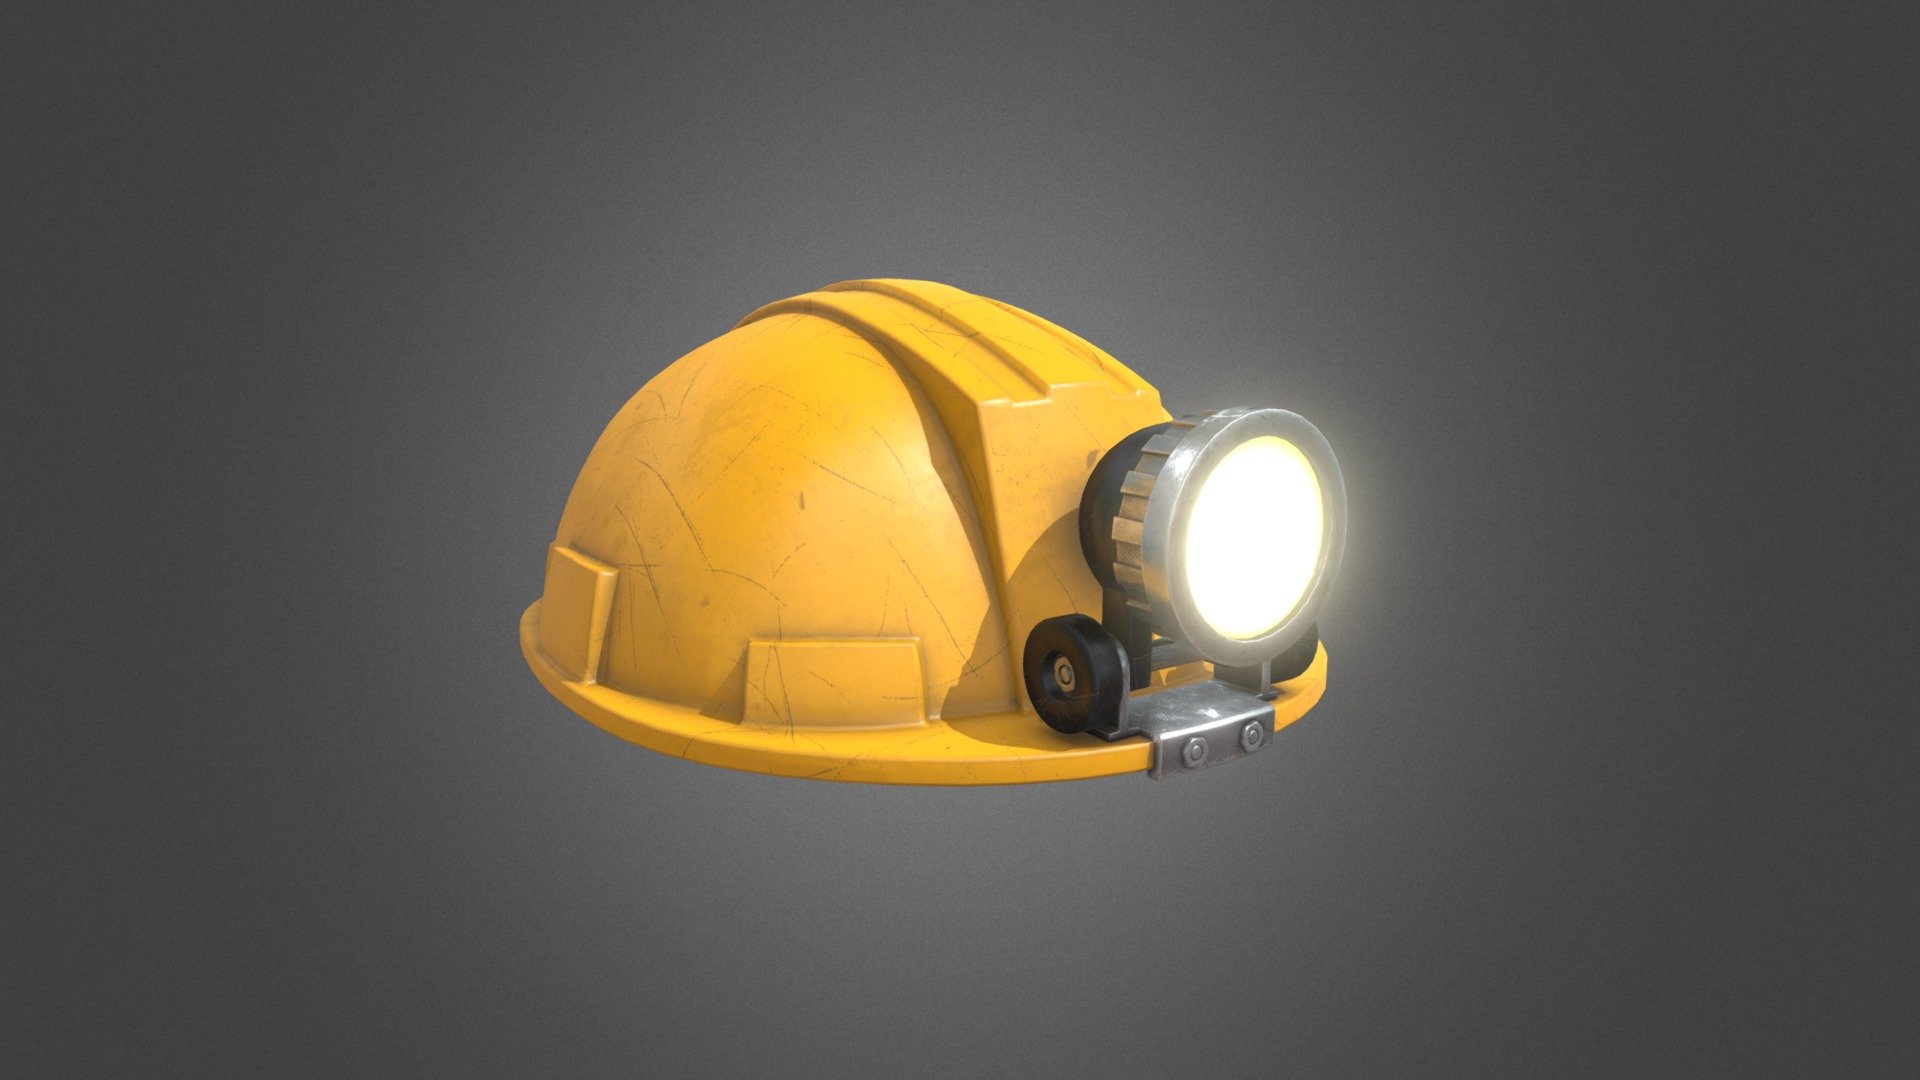 Hard hat

OBJ and 2048x2048 PNG textures

Texture include: Base Color, Emissive, Metallic, Normal, Roughness

8,241 vert 8,346 poly - Hard hat - 3D model by -eugenie- 3d model